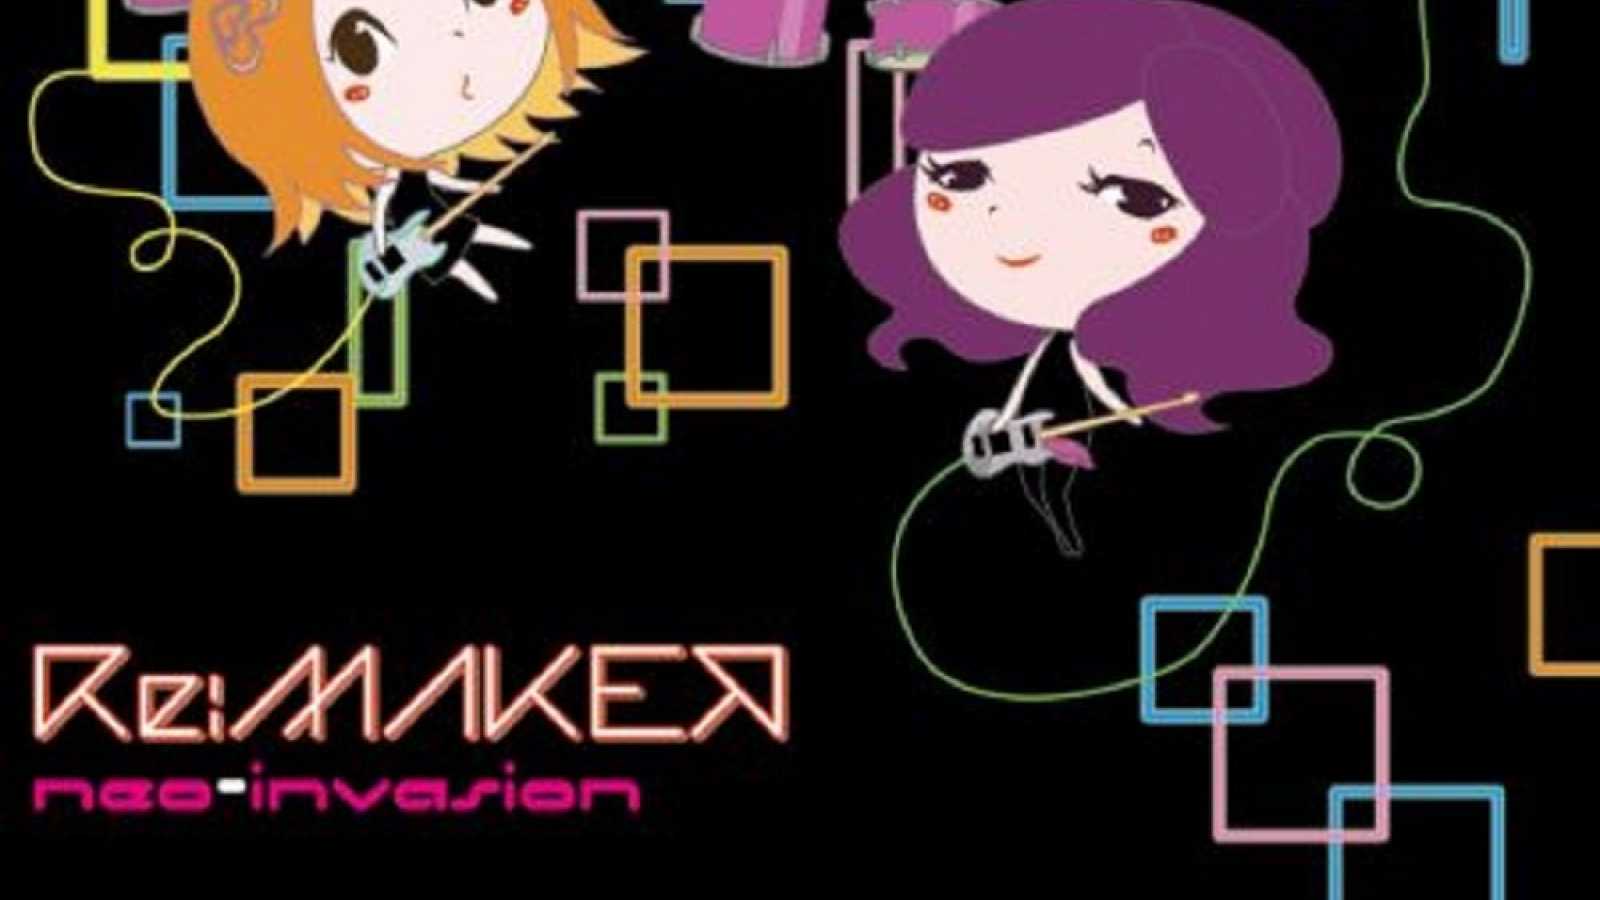 Re:MAKER - neo-invasion © TEARS MUSIC. All rights reserved.